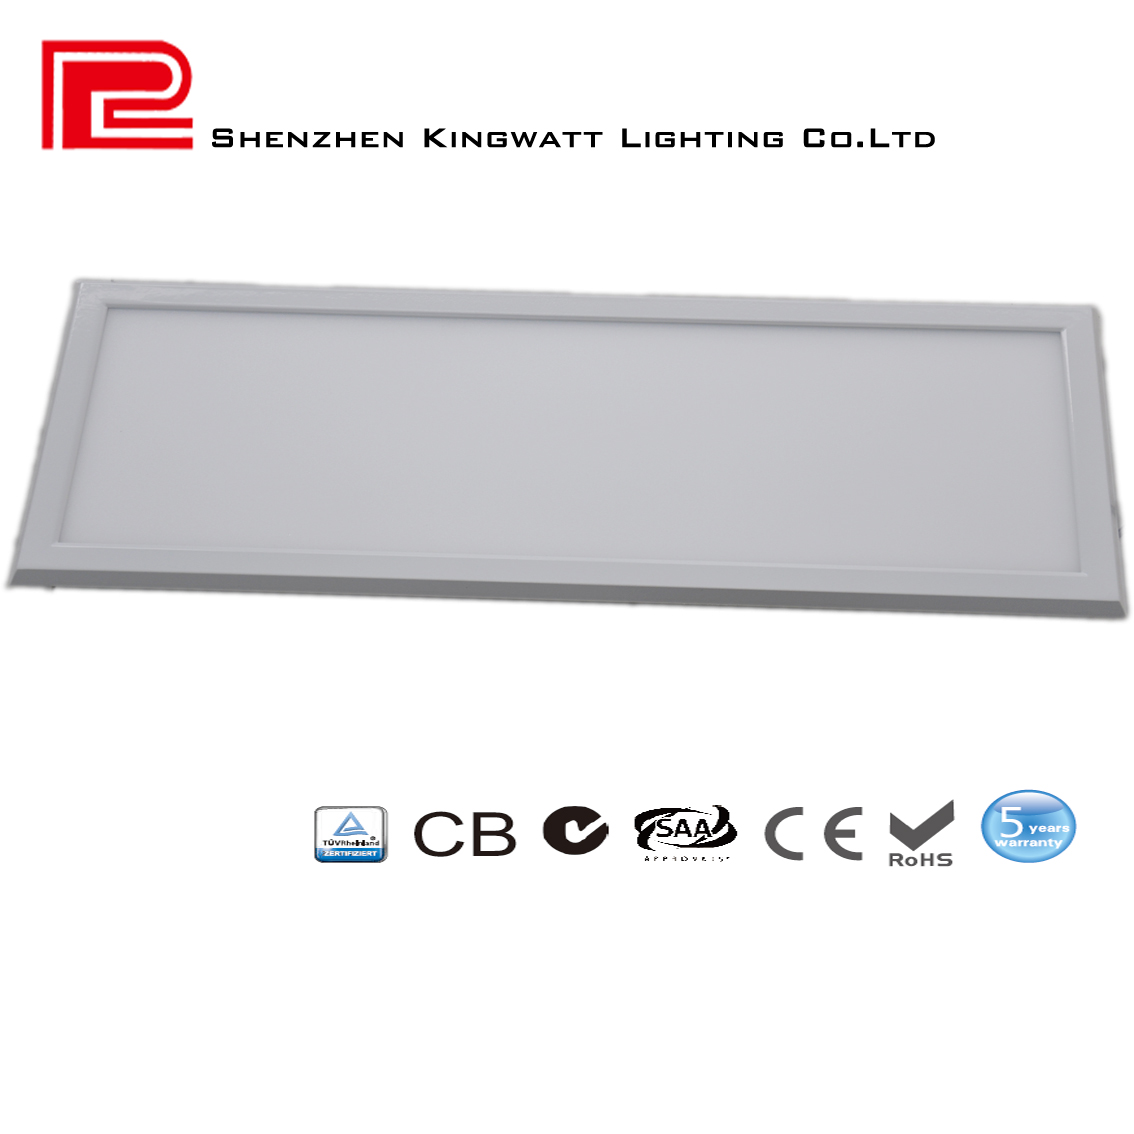 CB/CTEL/SAA/RoHS 100Lm/W LED Panel Light，600mm*600mm with 48W